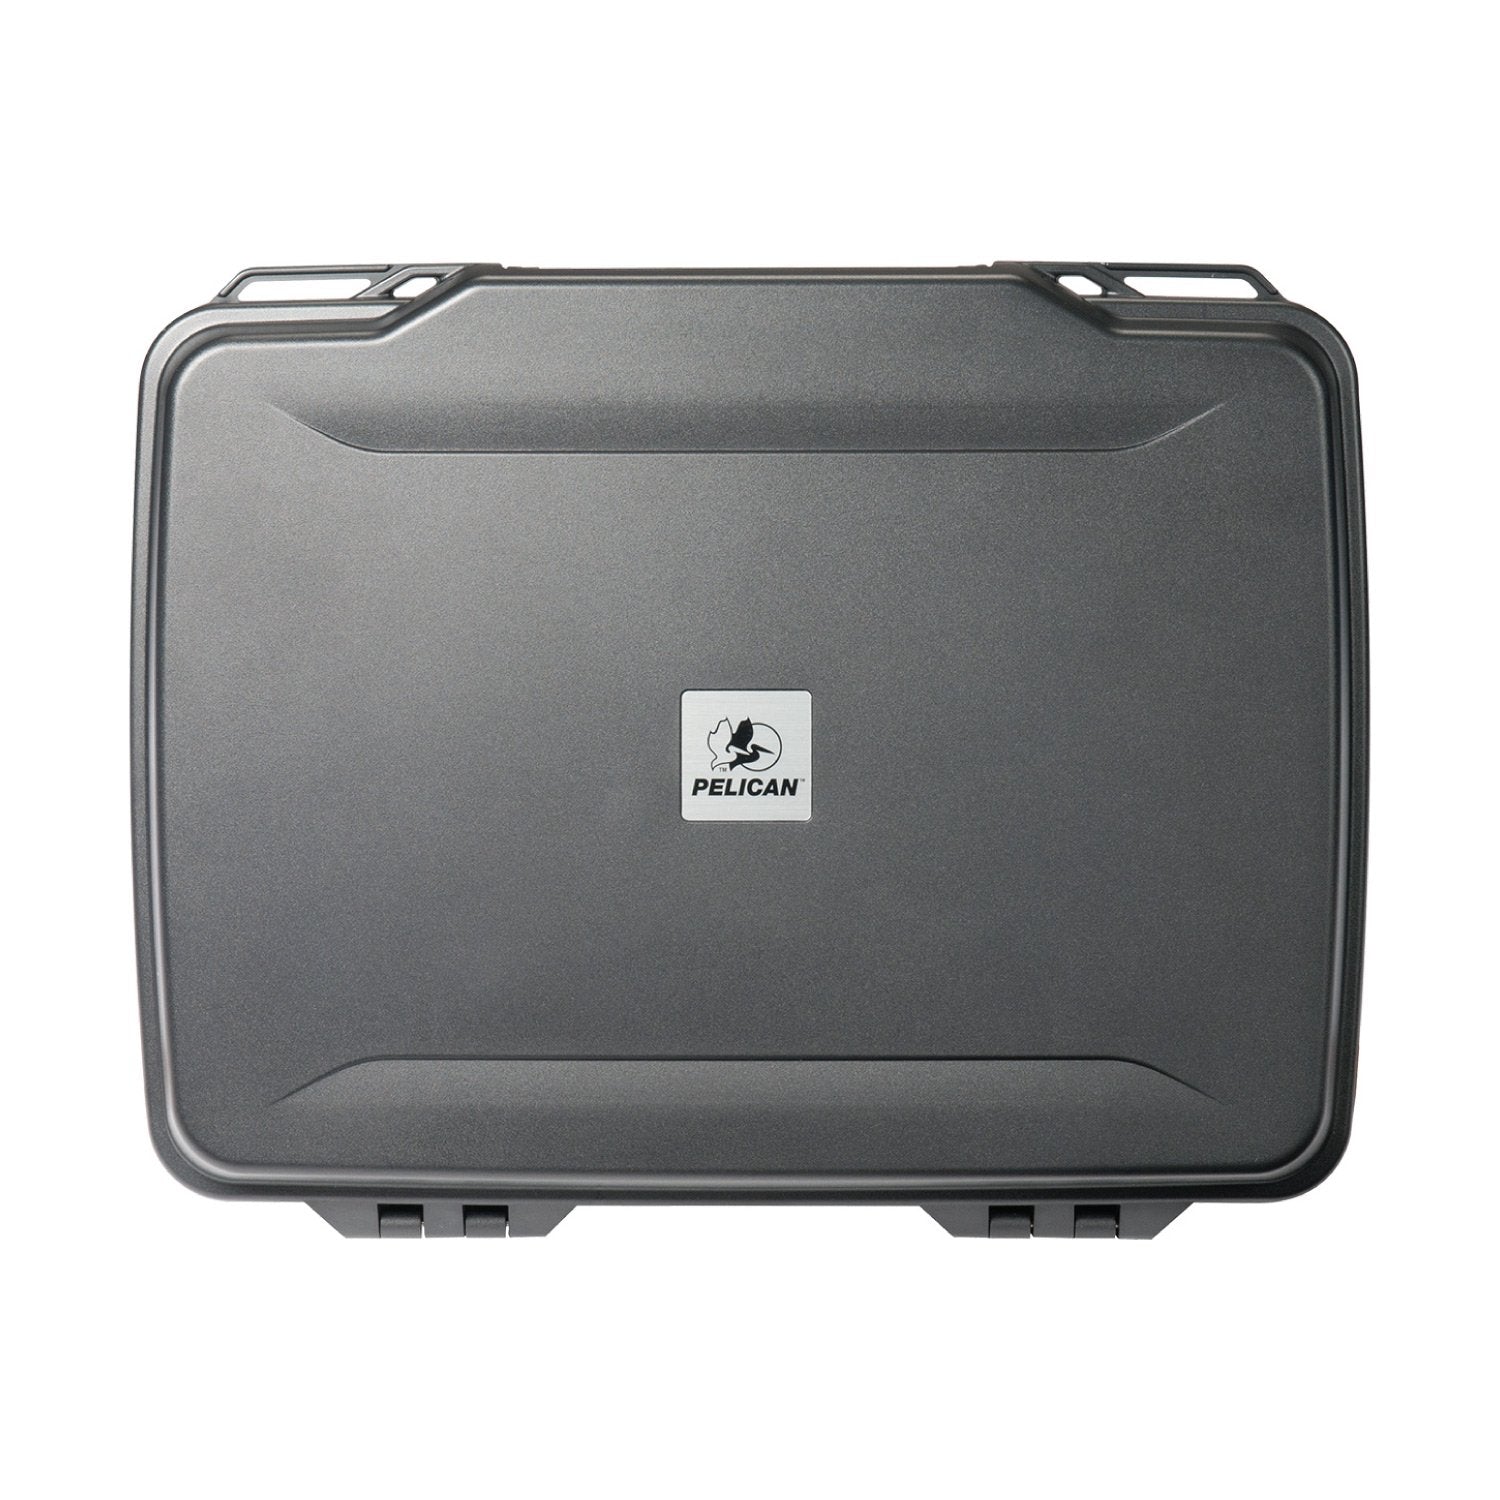 Pelican 1075 HardBack Laptop Case Bags, Packs and Cases Pelican Products Tactical Gear Supplier Tactical Distributors Australia